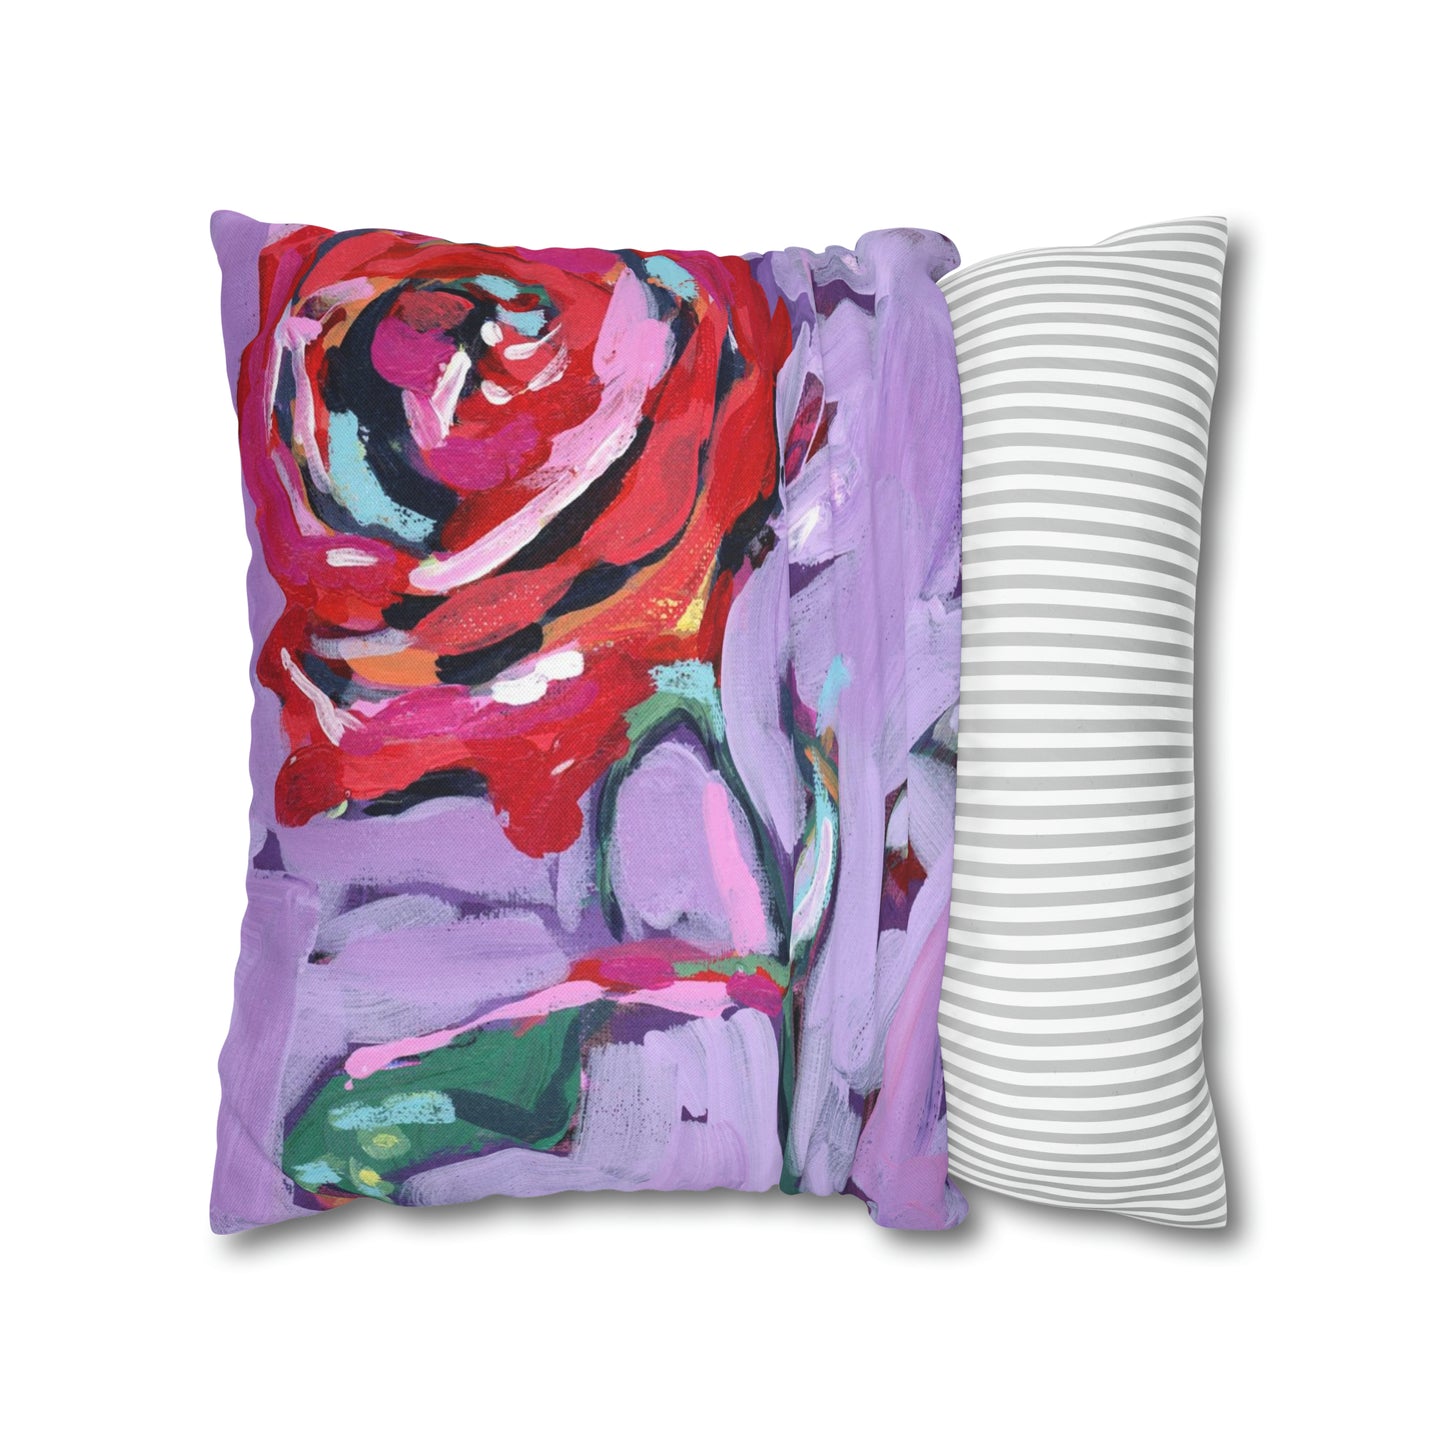 June Birth Flower Double-Sided Pillow Cover